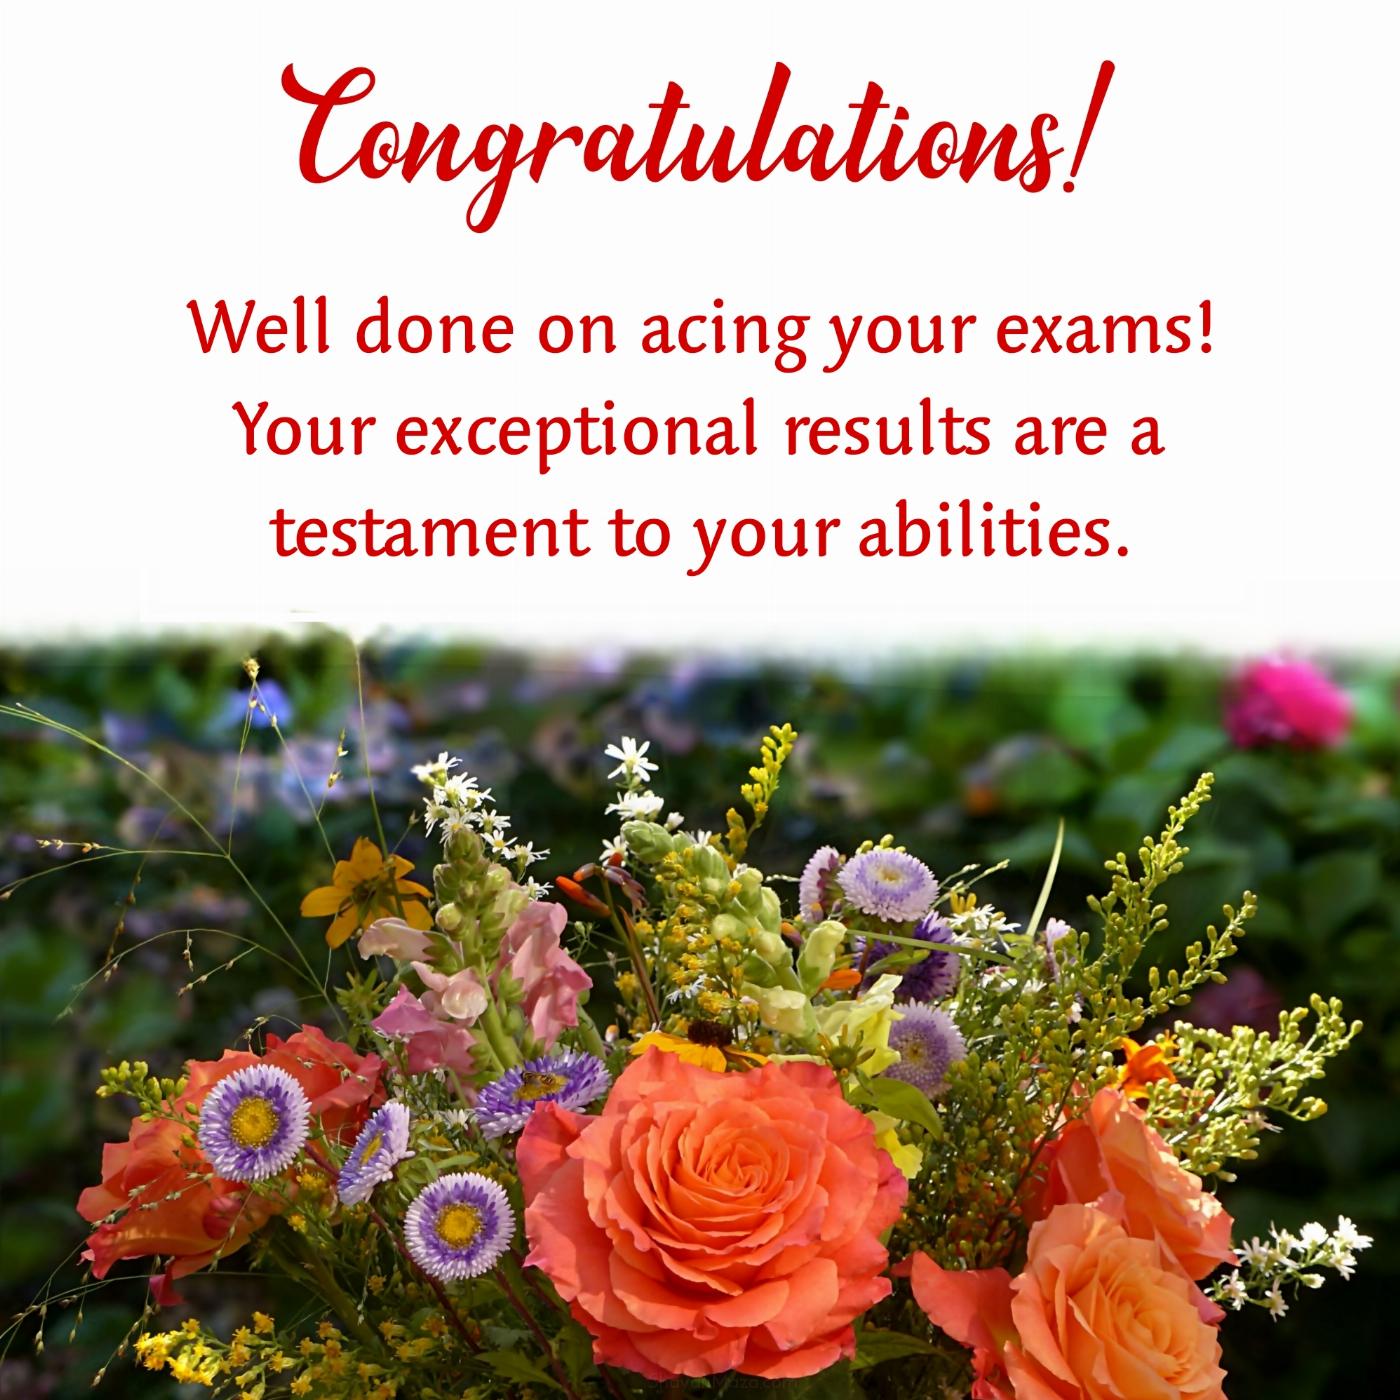 Well done on acing your exams